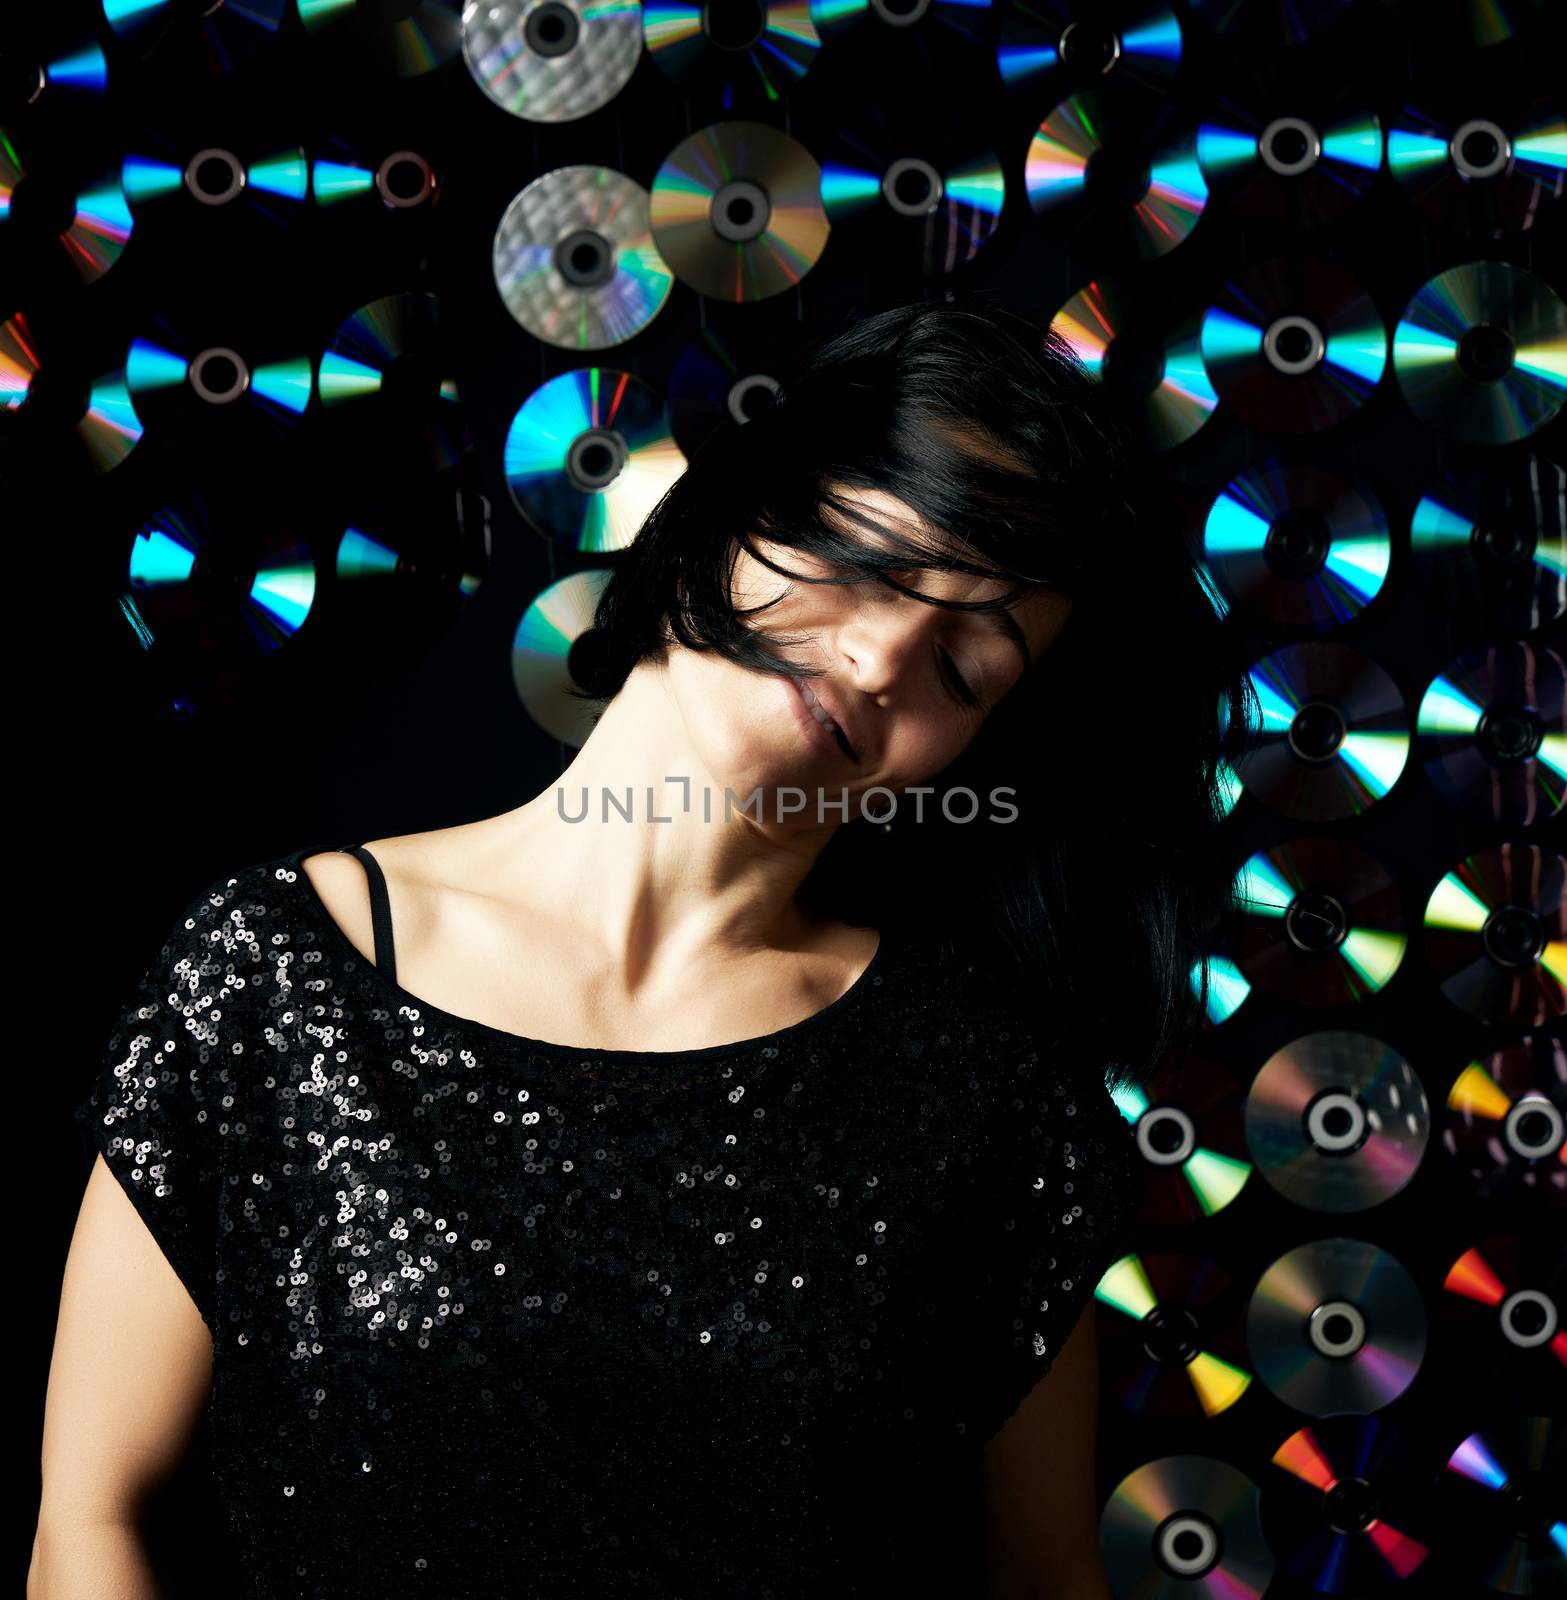 young woman of Caucasian appearance is dancing on a shiny flickering dark background, her hair is flying in different directions, the girl is smiling